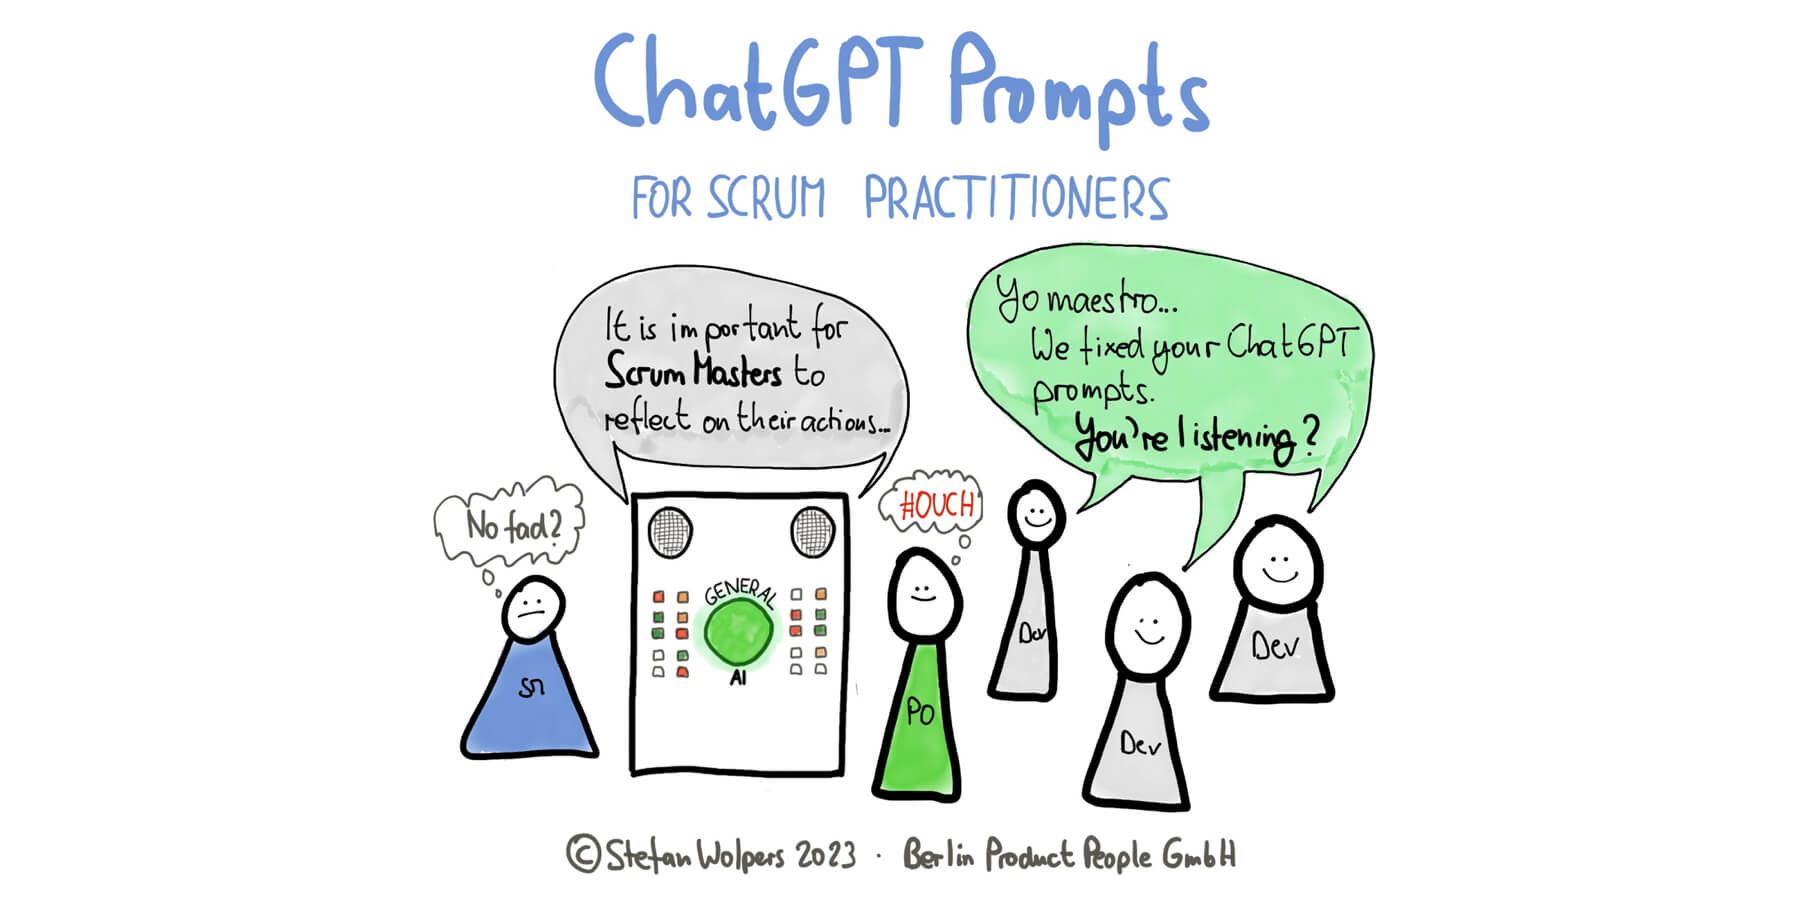 ChatGPT Prompts for Scrum Masters, Product Owners, and Developers — Berlin-Product-People.com